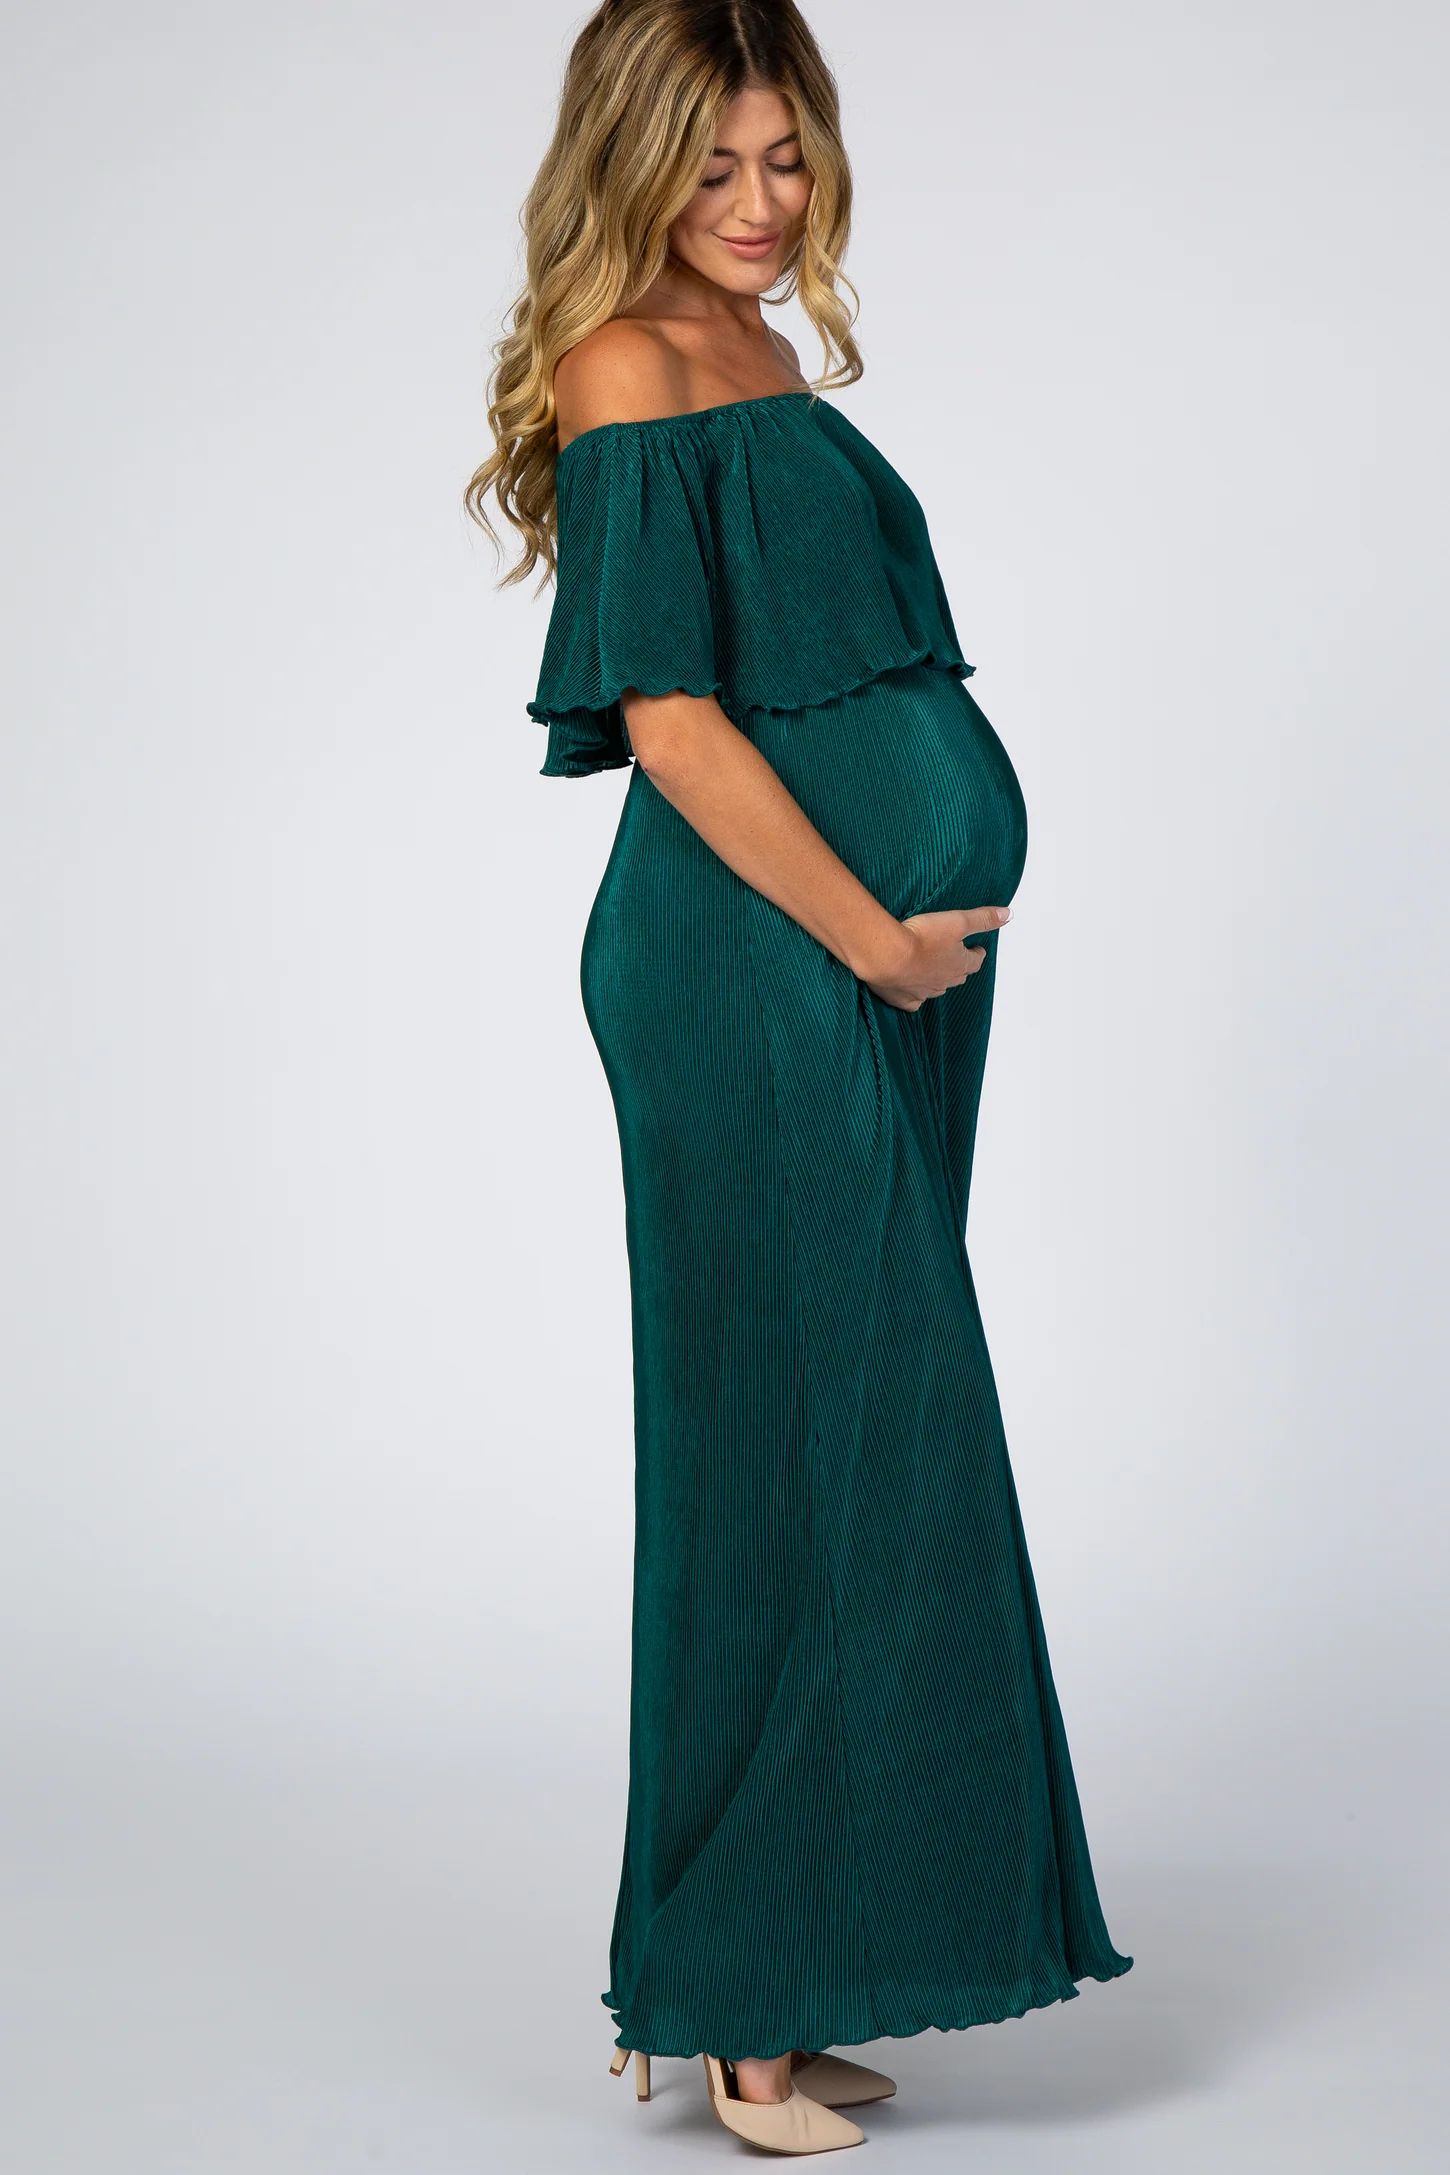 Forest Green Pleated Ruffle Off Shoulder Maternity Maxi Dress | PinkBlush Maternity